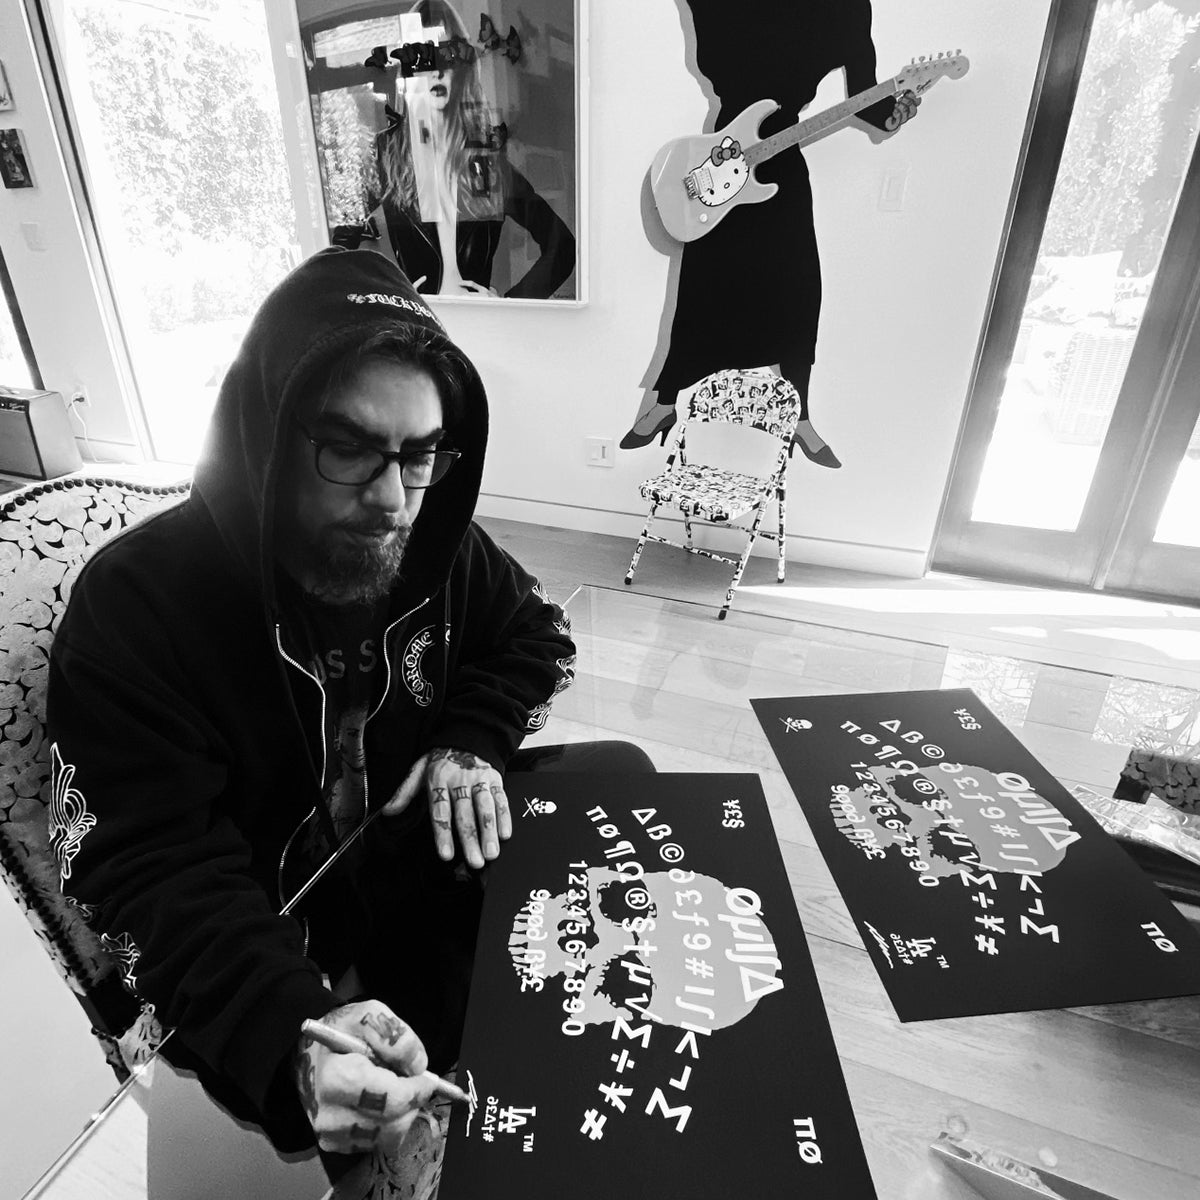 Dave Navarro &quot;LAD OUIJA&quot; - Glow in the Dark Screen Printed Edition of 30 with Planchette - 12 x 18&quot;